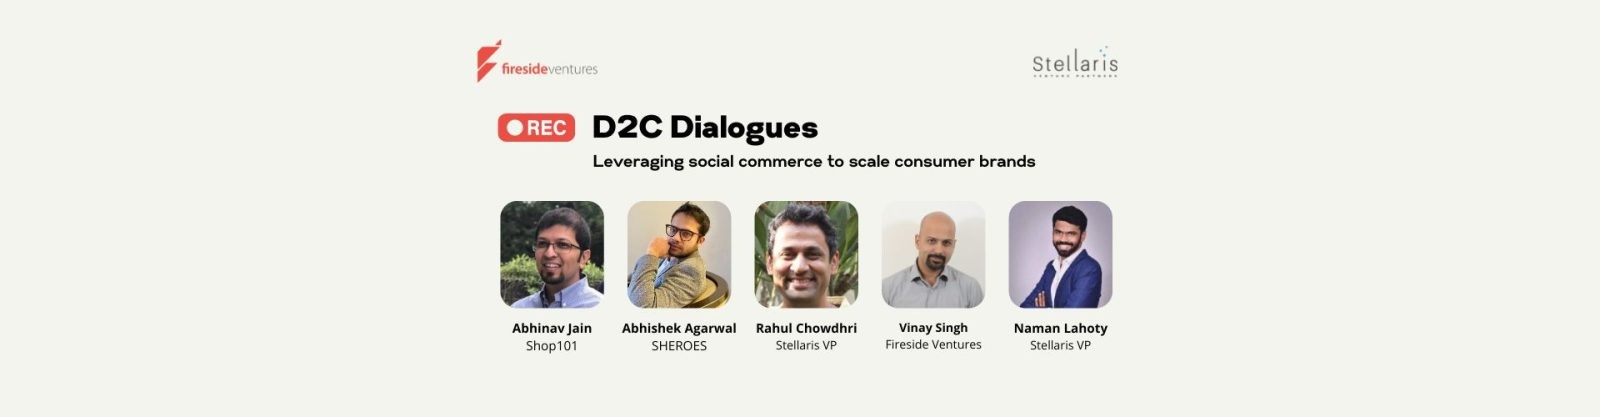 D2C Dialogues #4: Leveraging social commerce to scale consumer brands